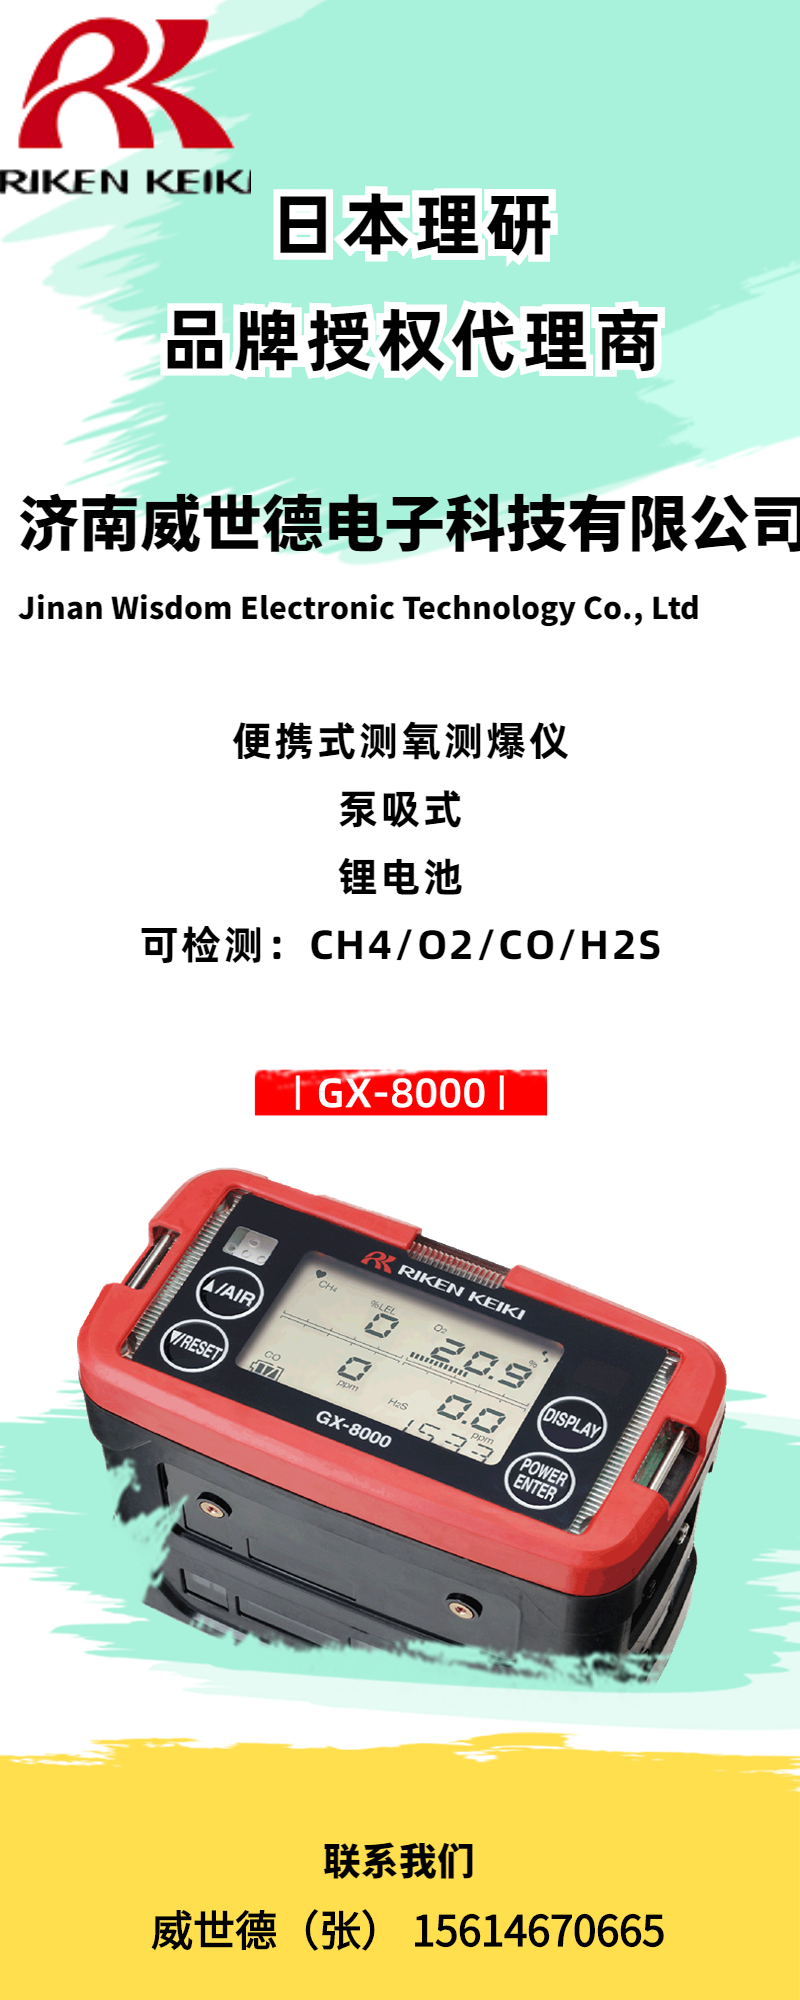 Four in one gas detector, Nippon Institute GX-8000 portable leakage alarm